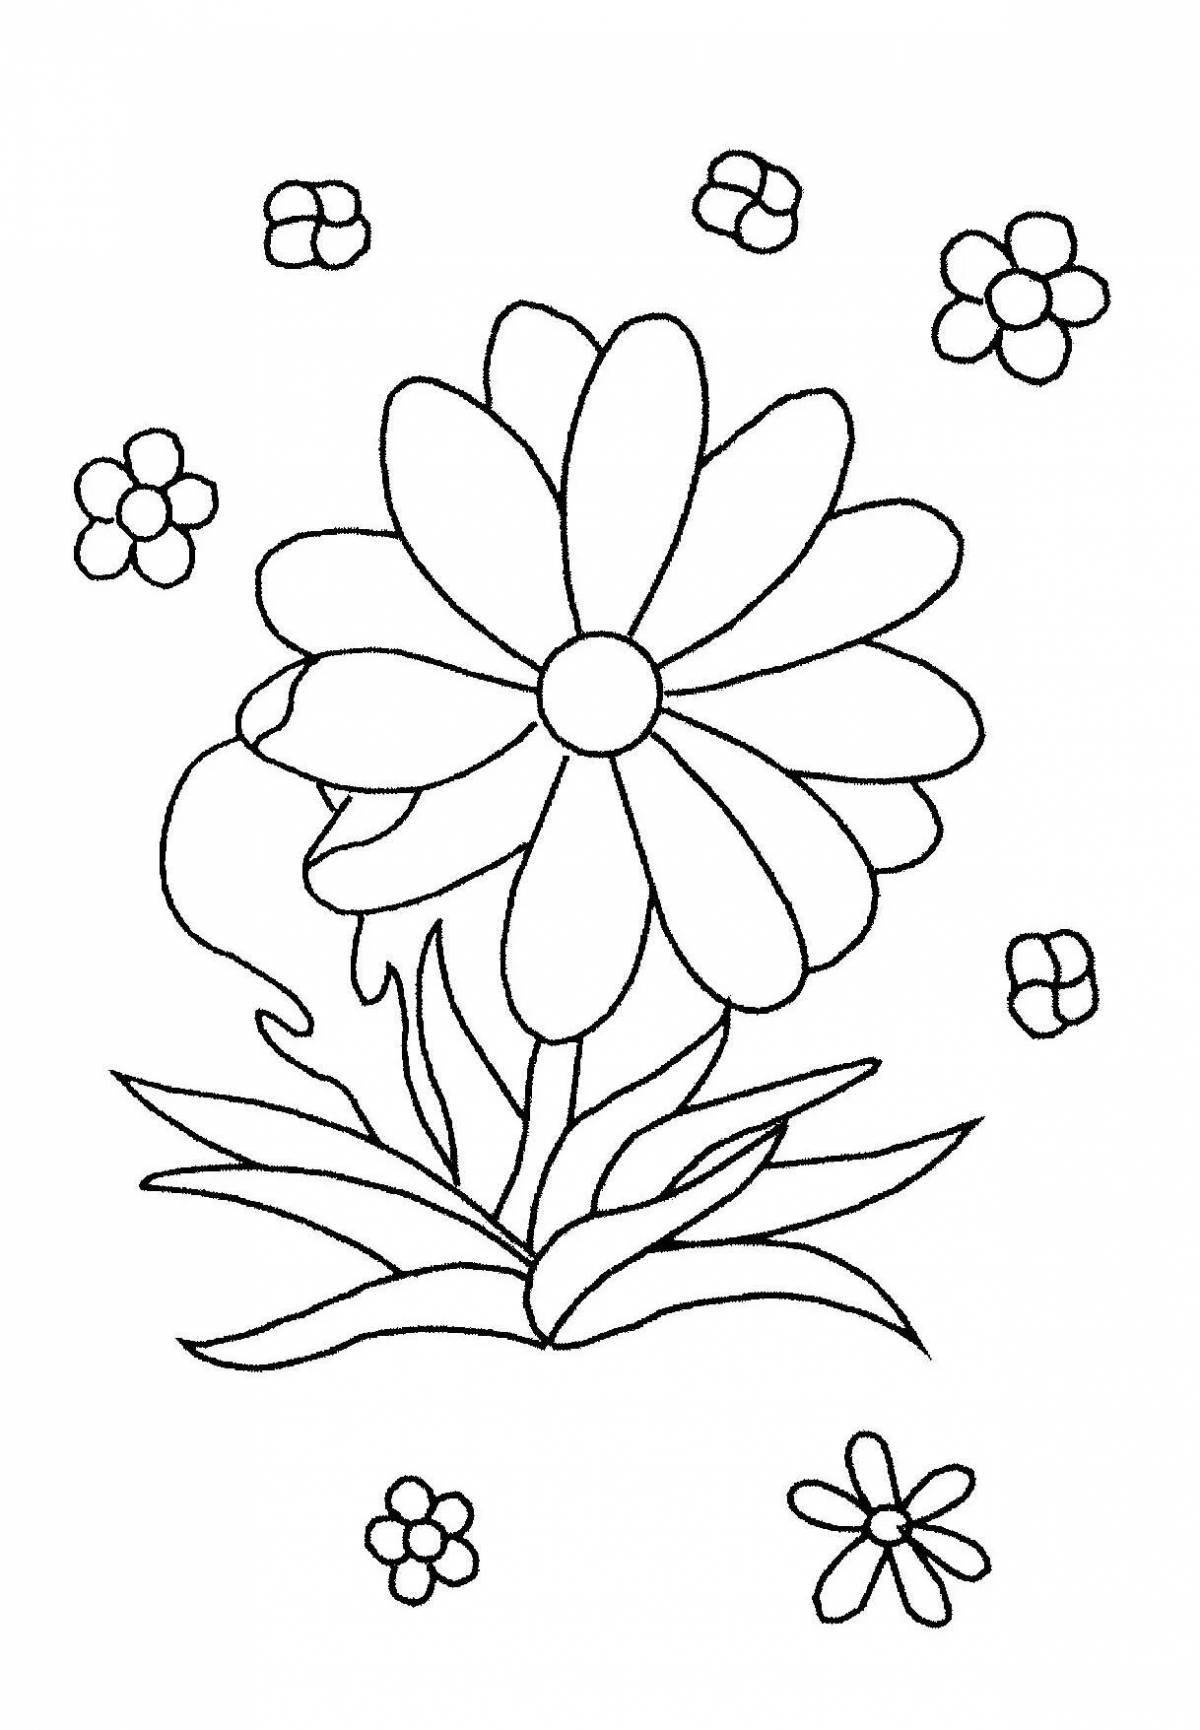 Blissful coloring flower for children 5-6 years old